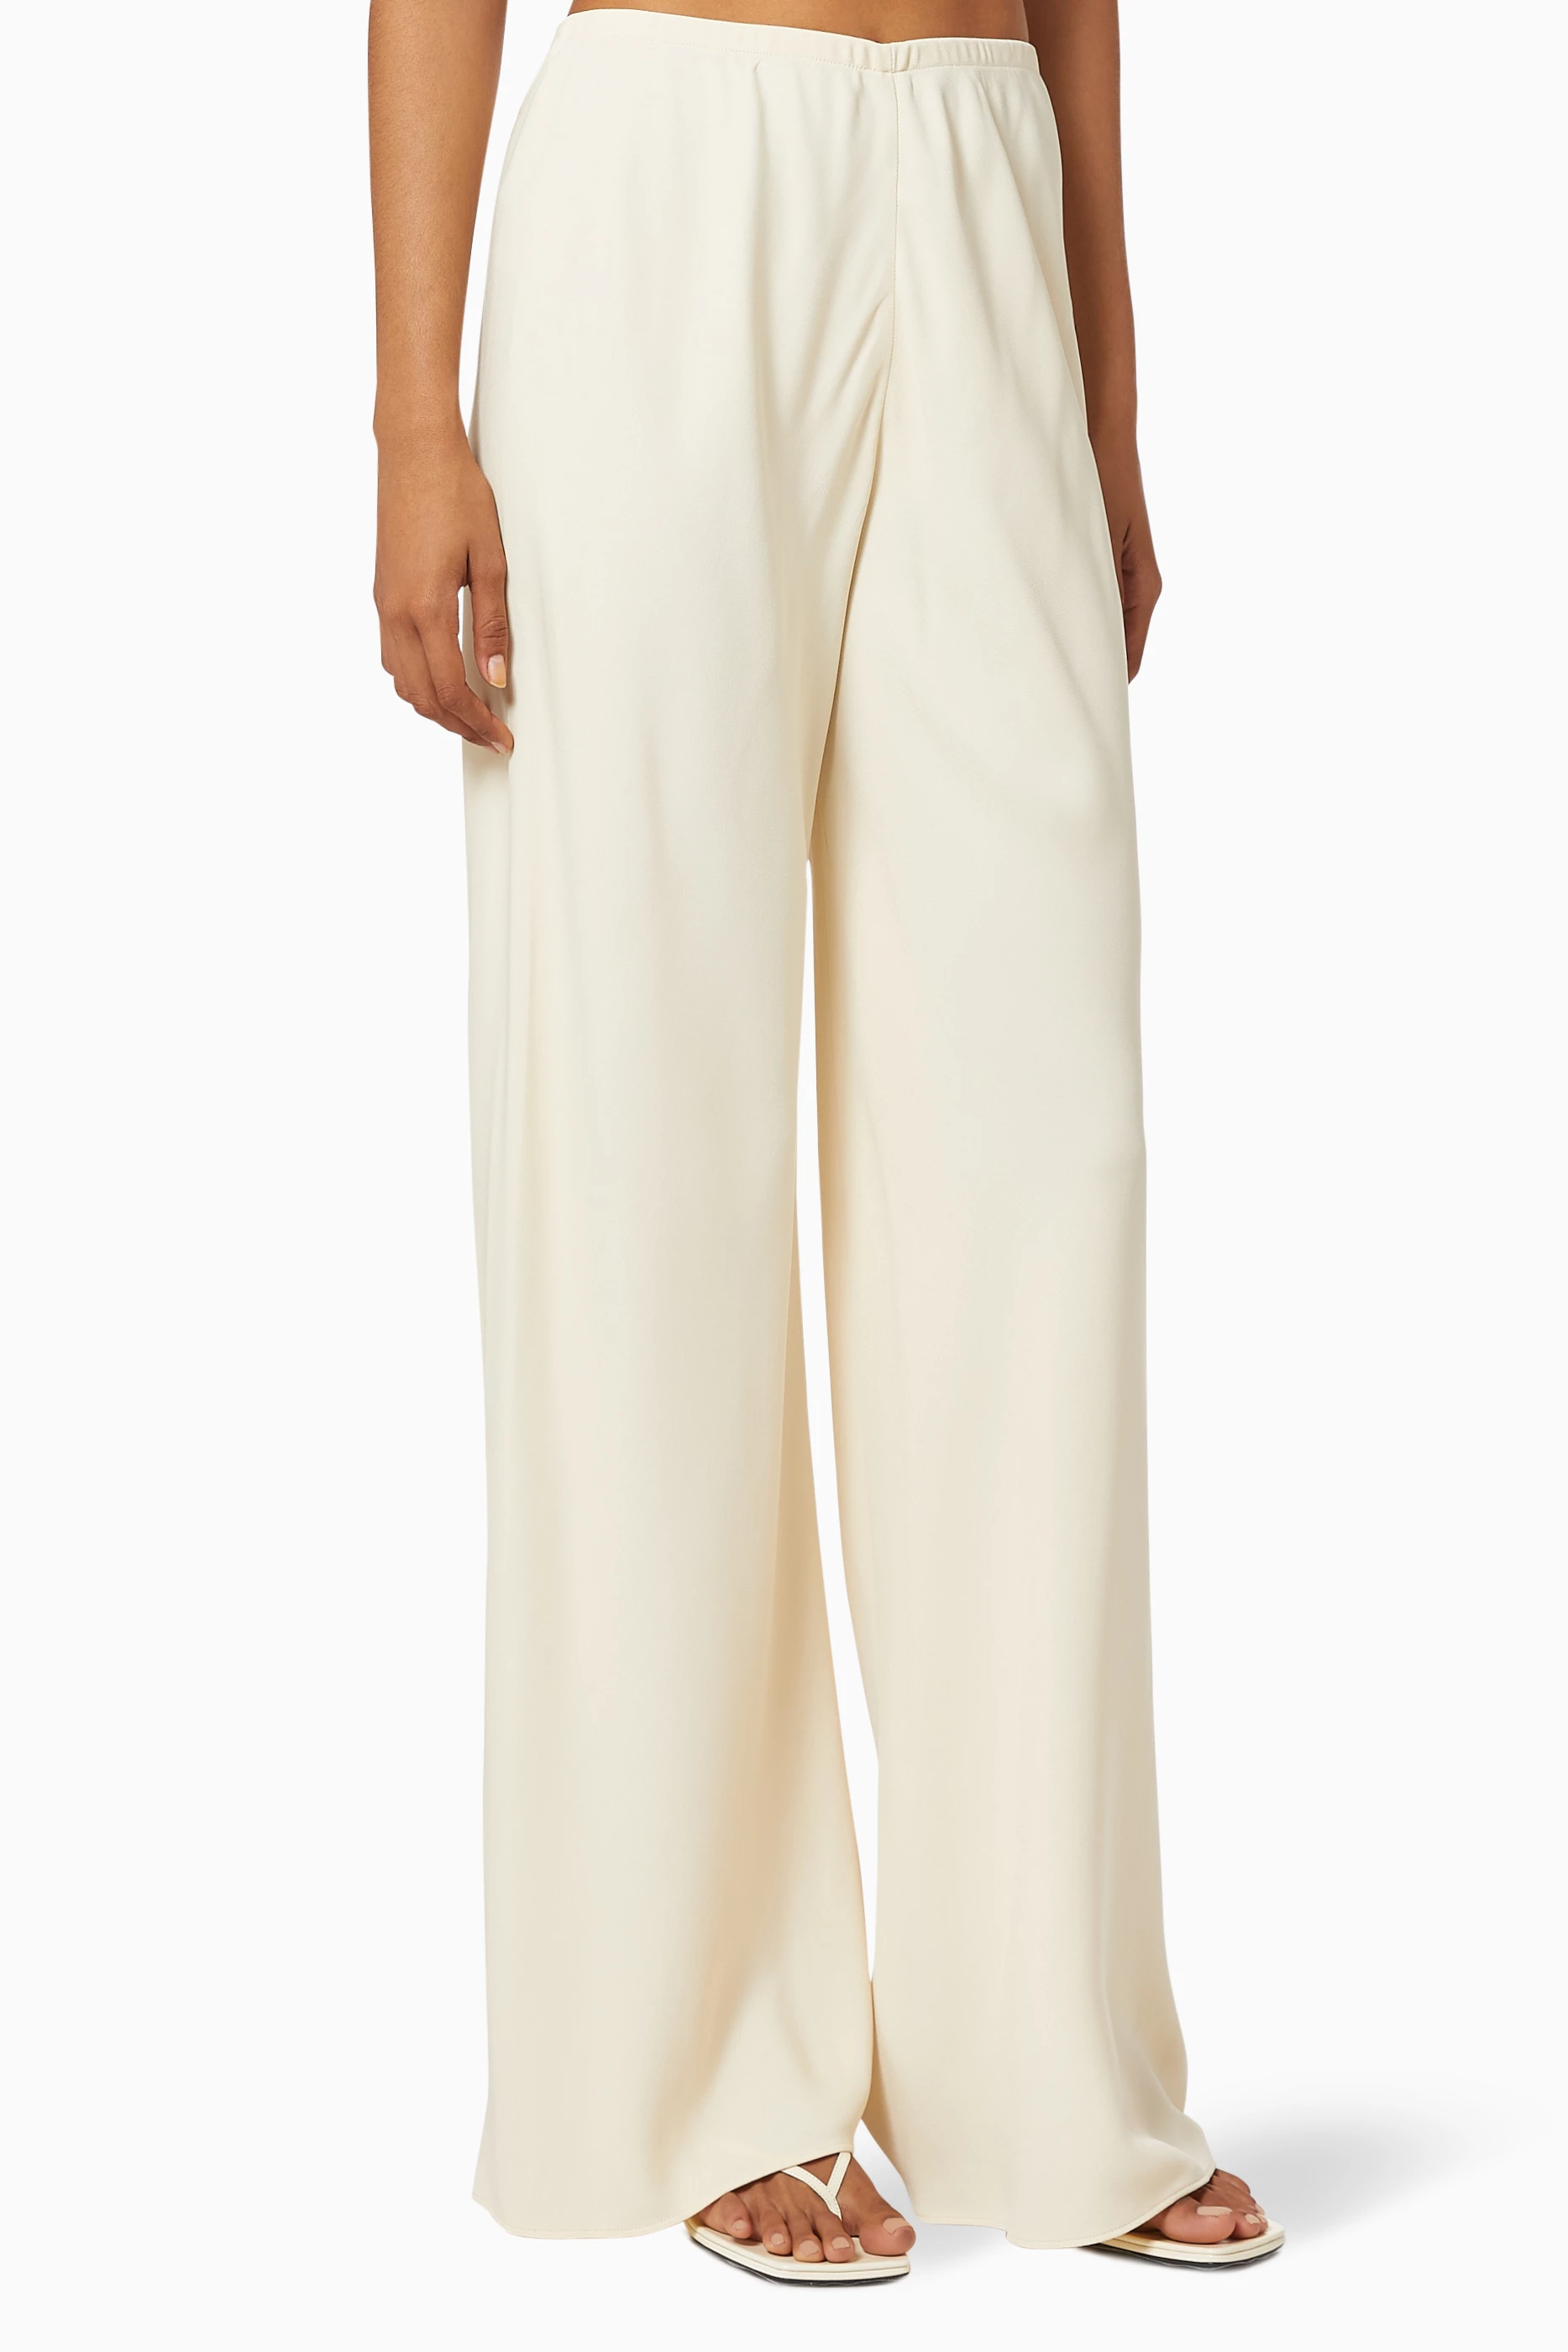 Buy The Row Neutral Gala Pants in Viscose Cady for Women in UAE | Ounass